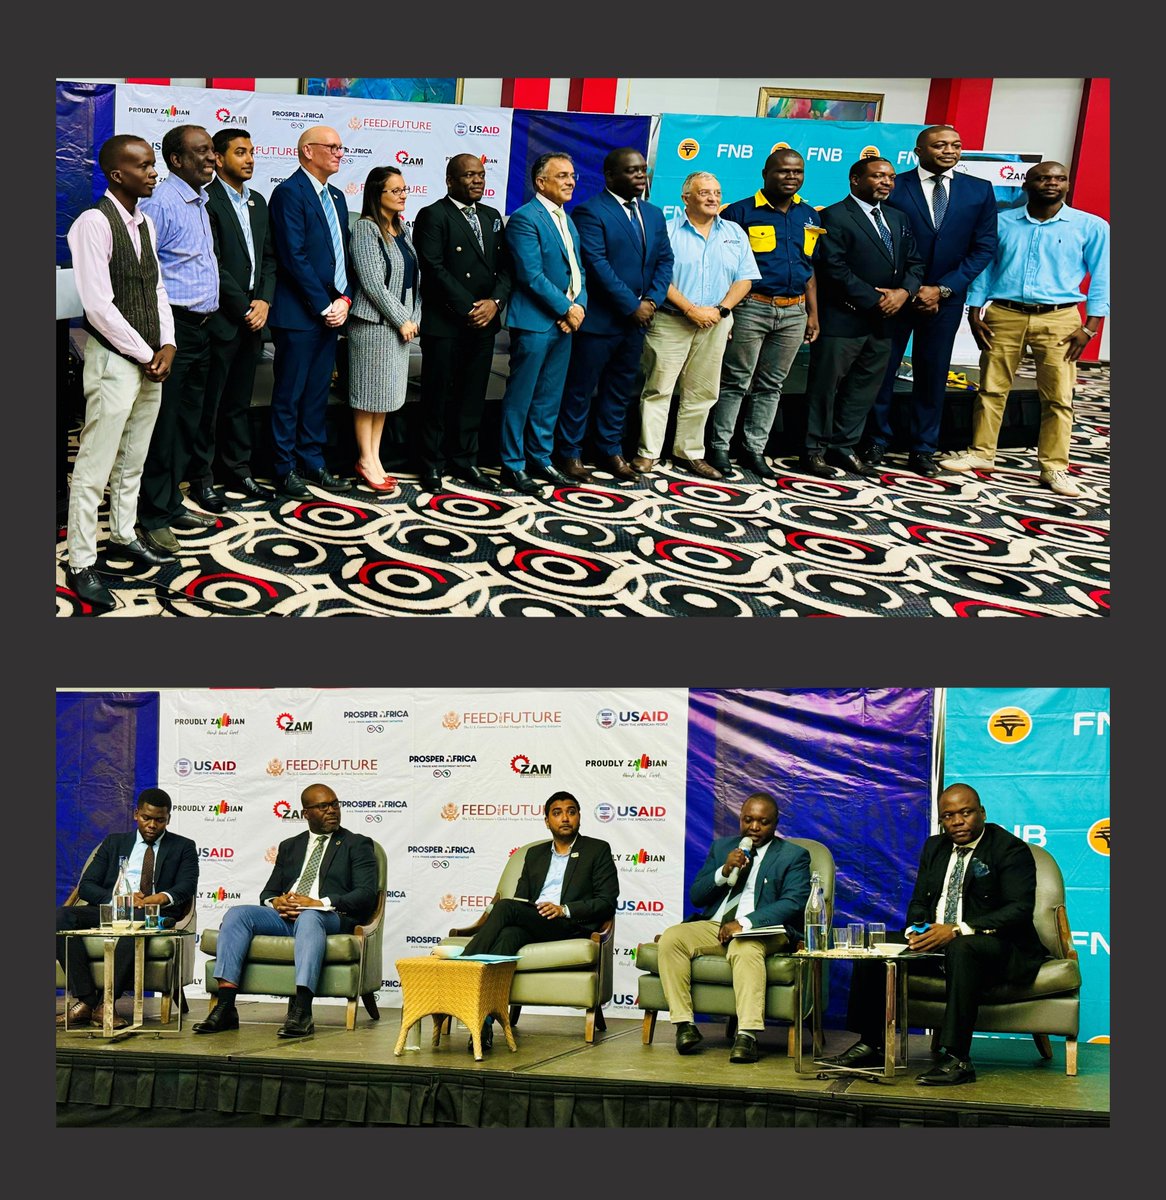 At today's @ZambiaMfg Trade Facilitation Conference, CBC's Dr @JonathanPinifo1 moderated insightful #AfCFTA panel showcasing diverse perspectives+a shared vision 4 seamless intra-regional #trade. Here's to addressing challenges & unlocking Africa's #economicintegration potential!